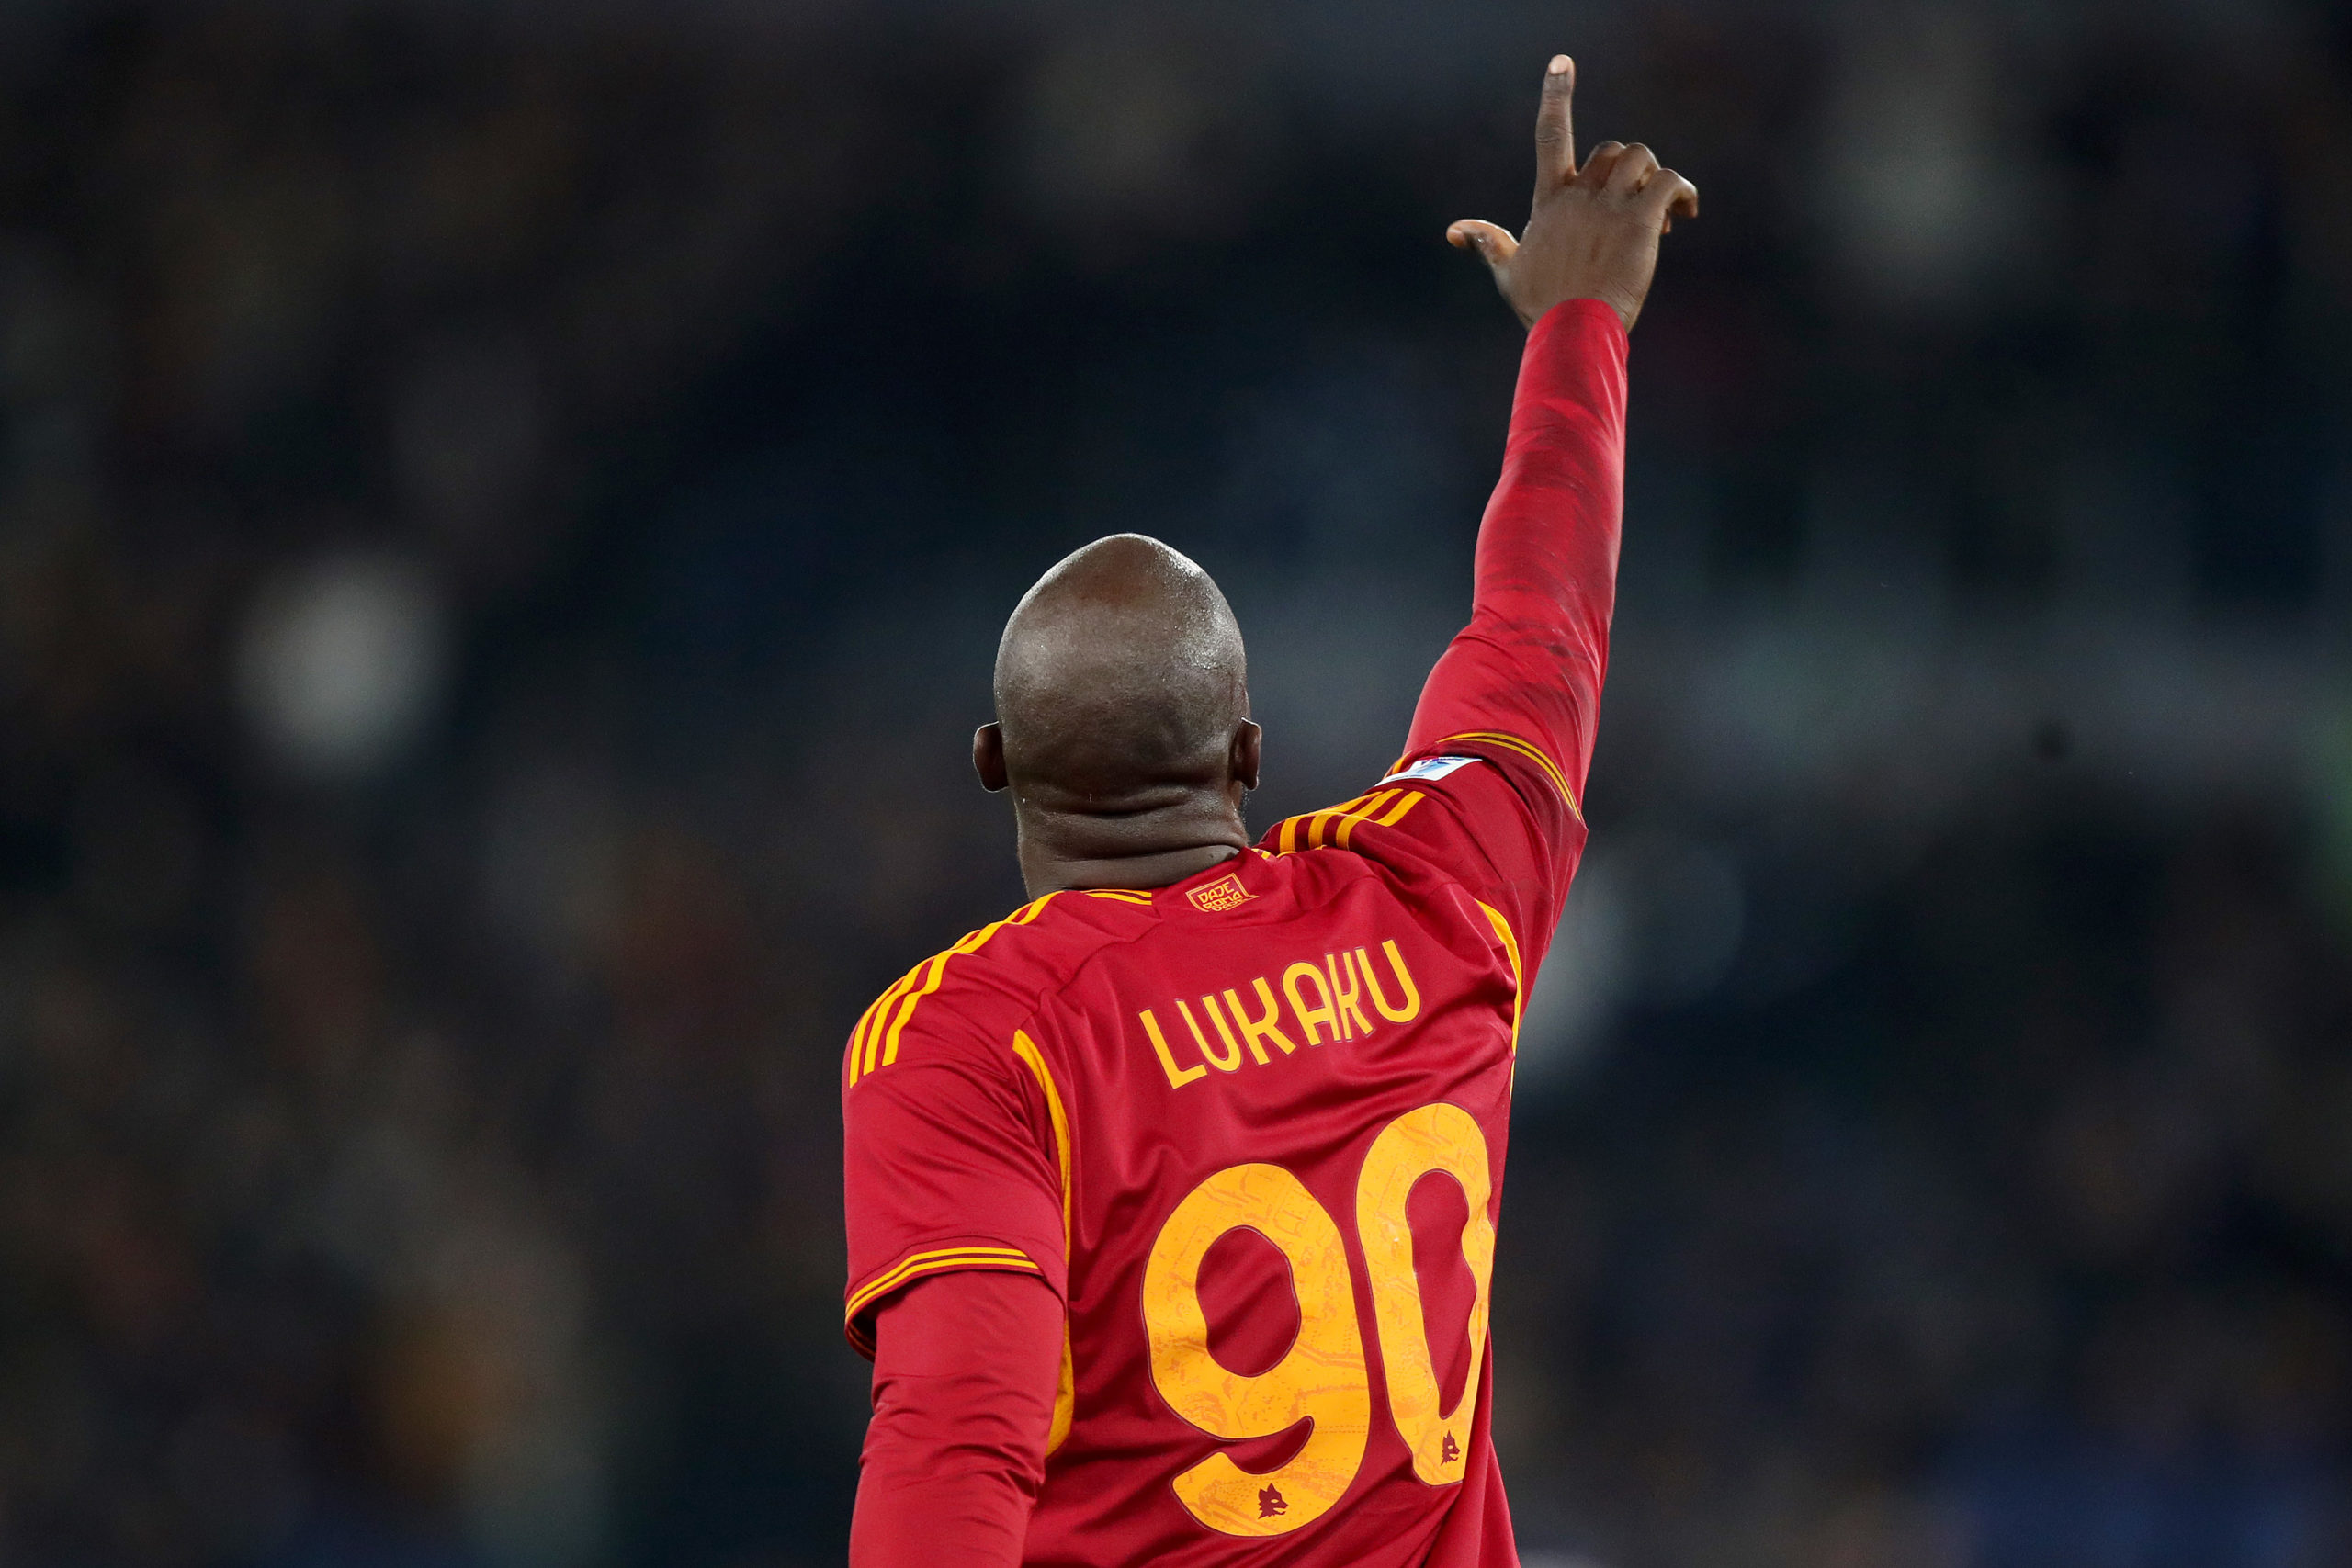 Romelu Lukaku has been in a funk for a while and the arrival of Daniele De Rossi hasn’t helped his numbers despite his more proactive style.